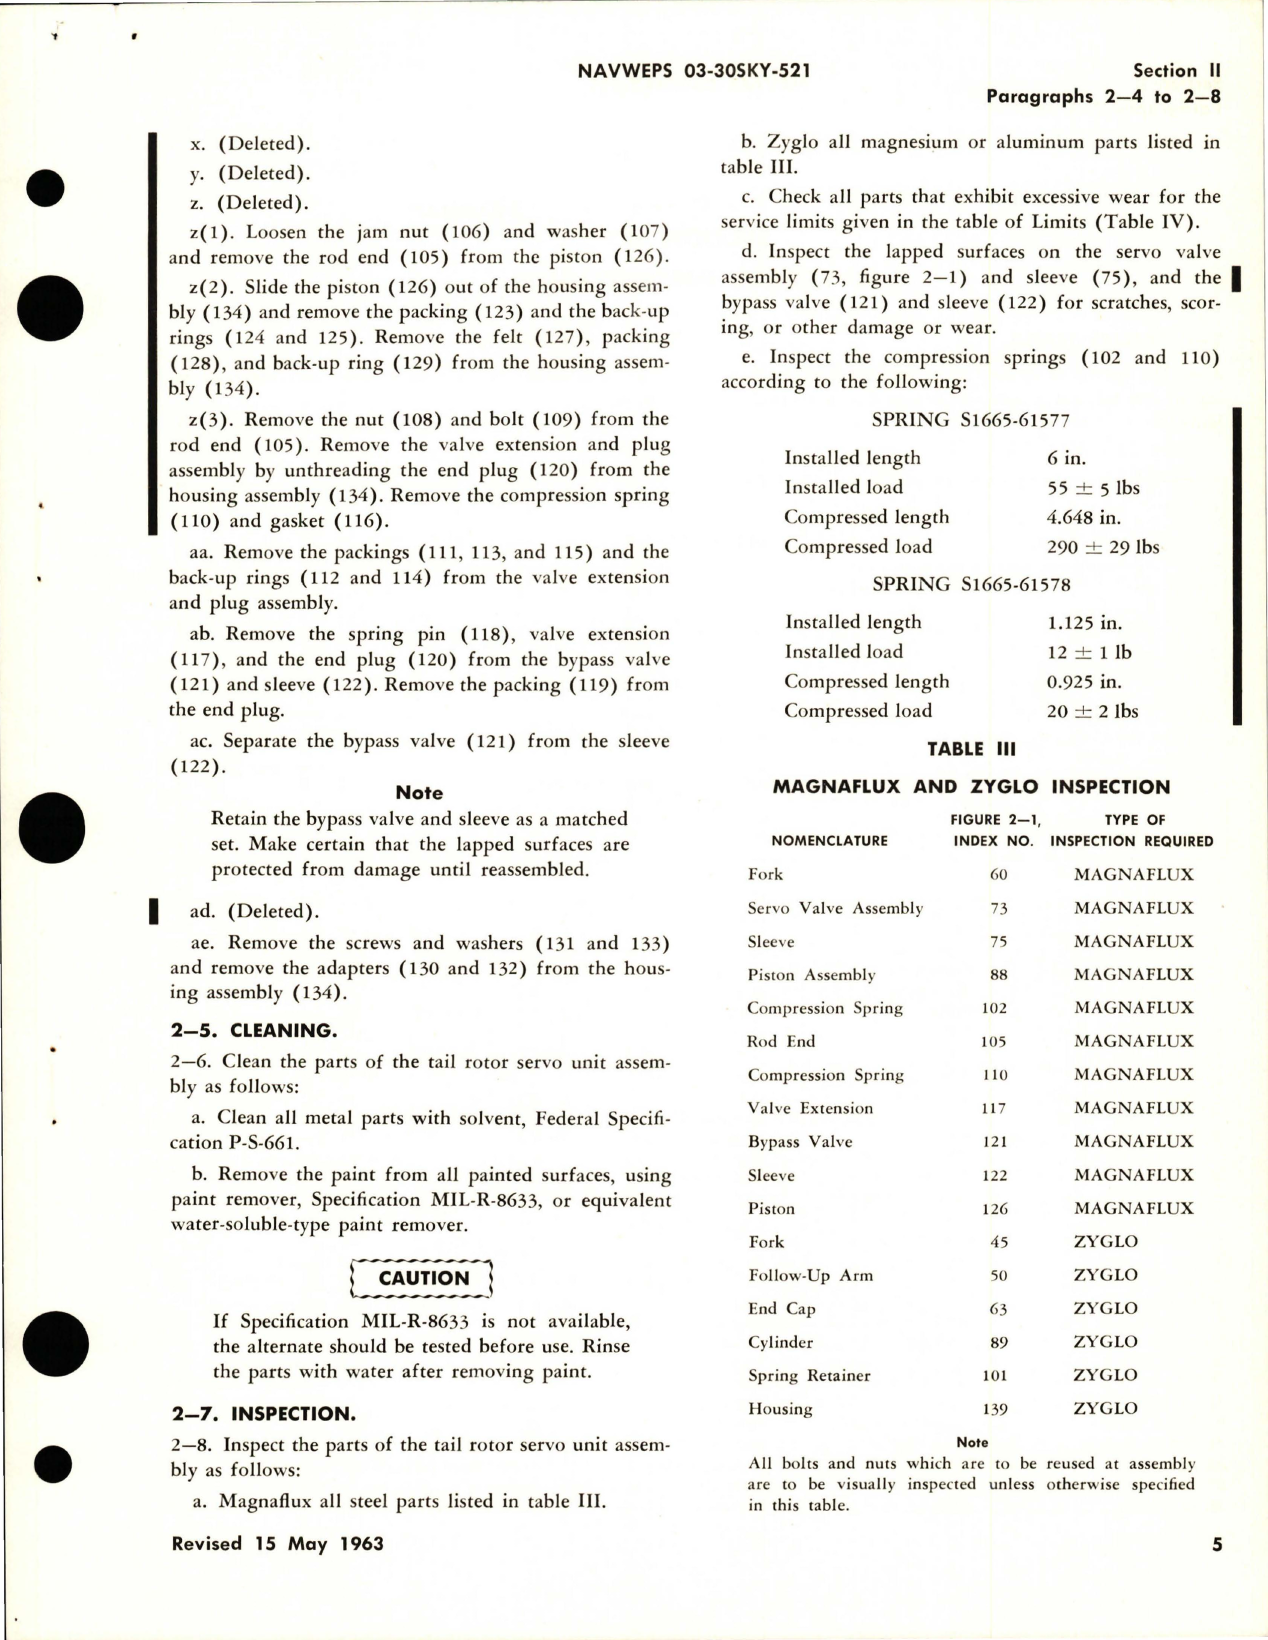 Sample page 5 from AirCorps Library document: Overhaul Instructions for Tail Rotor Servo Unit Assembly and Sub Assembly